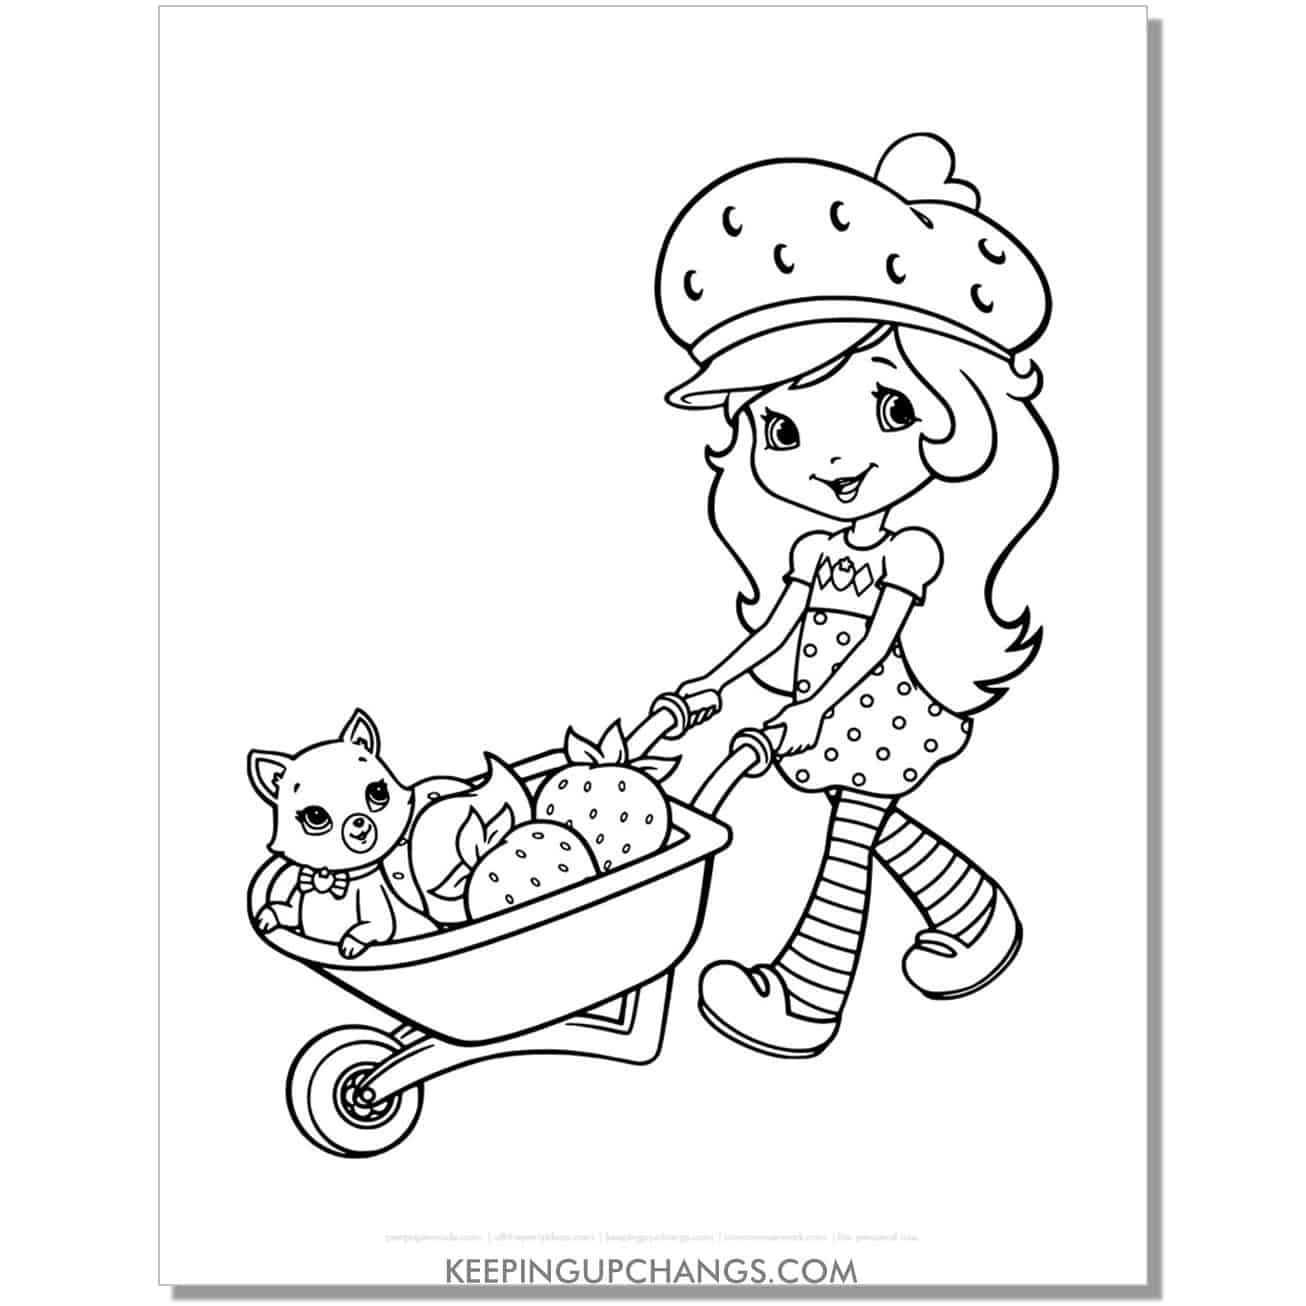 free strawberry shortcake pushing barrel of strawberries with cat custard coloring page, sheet.